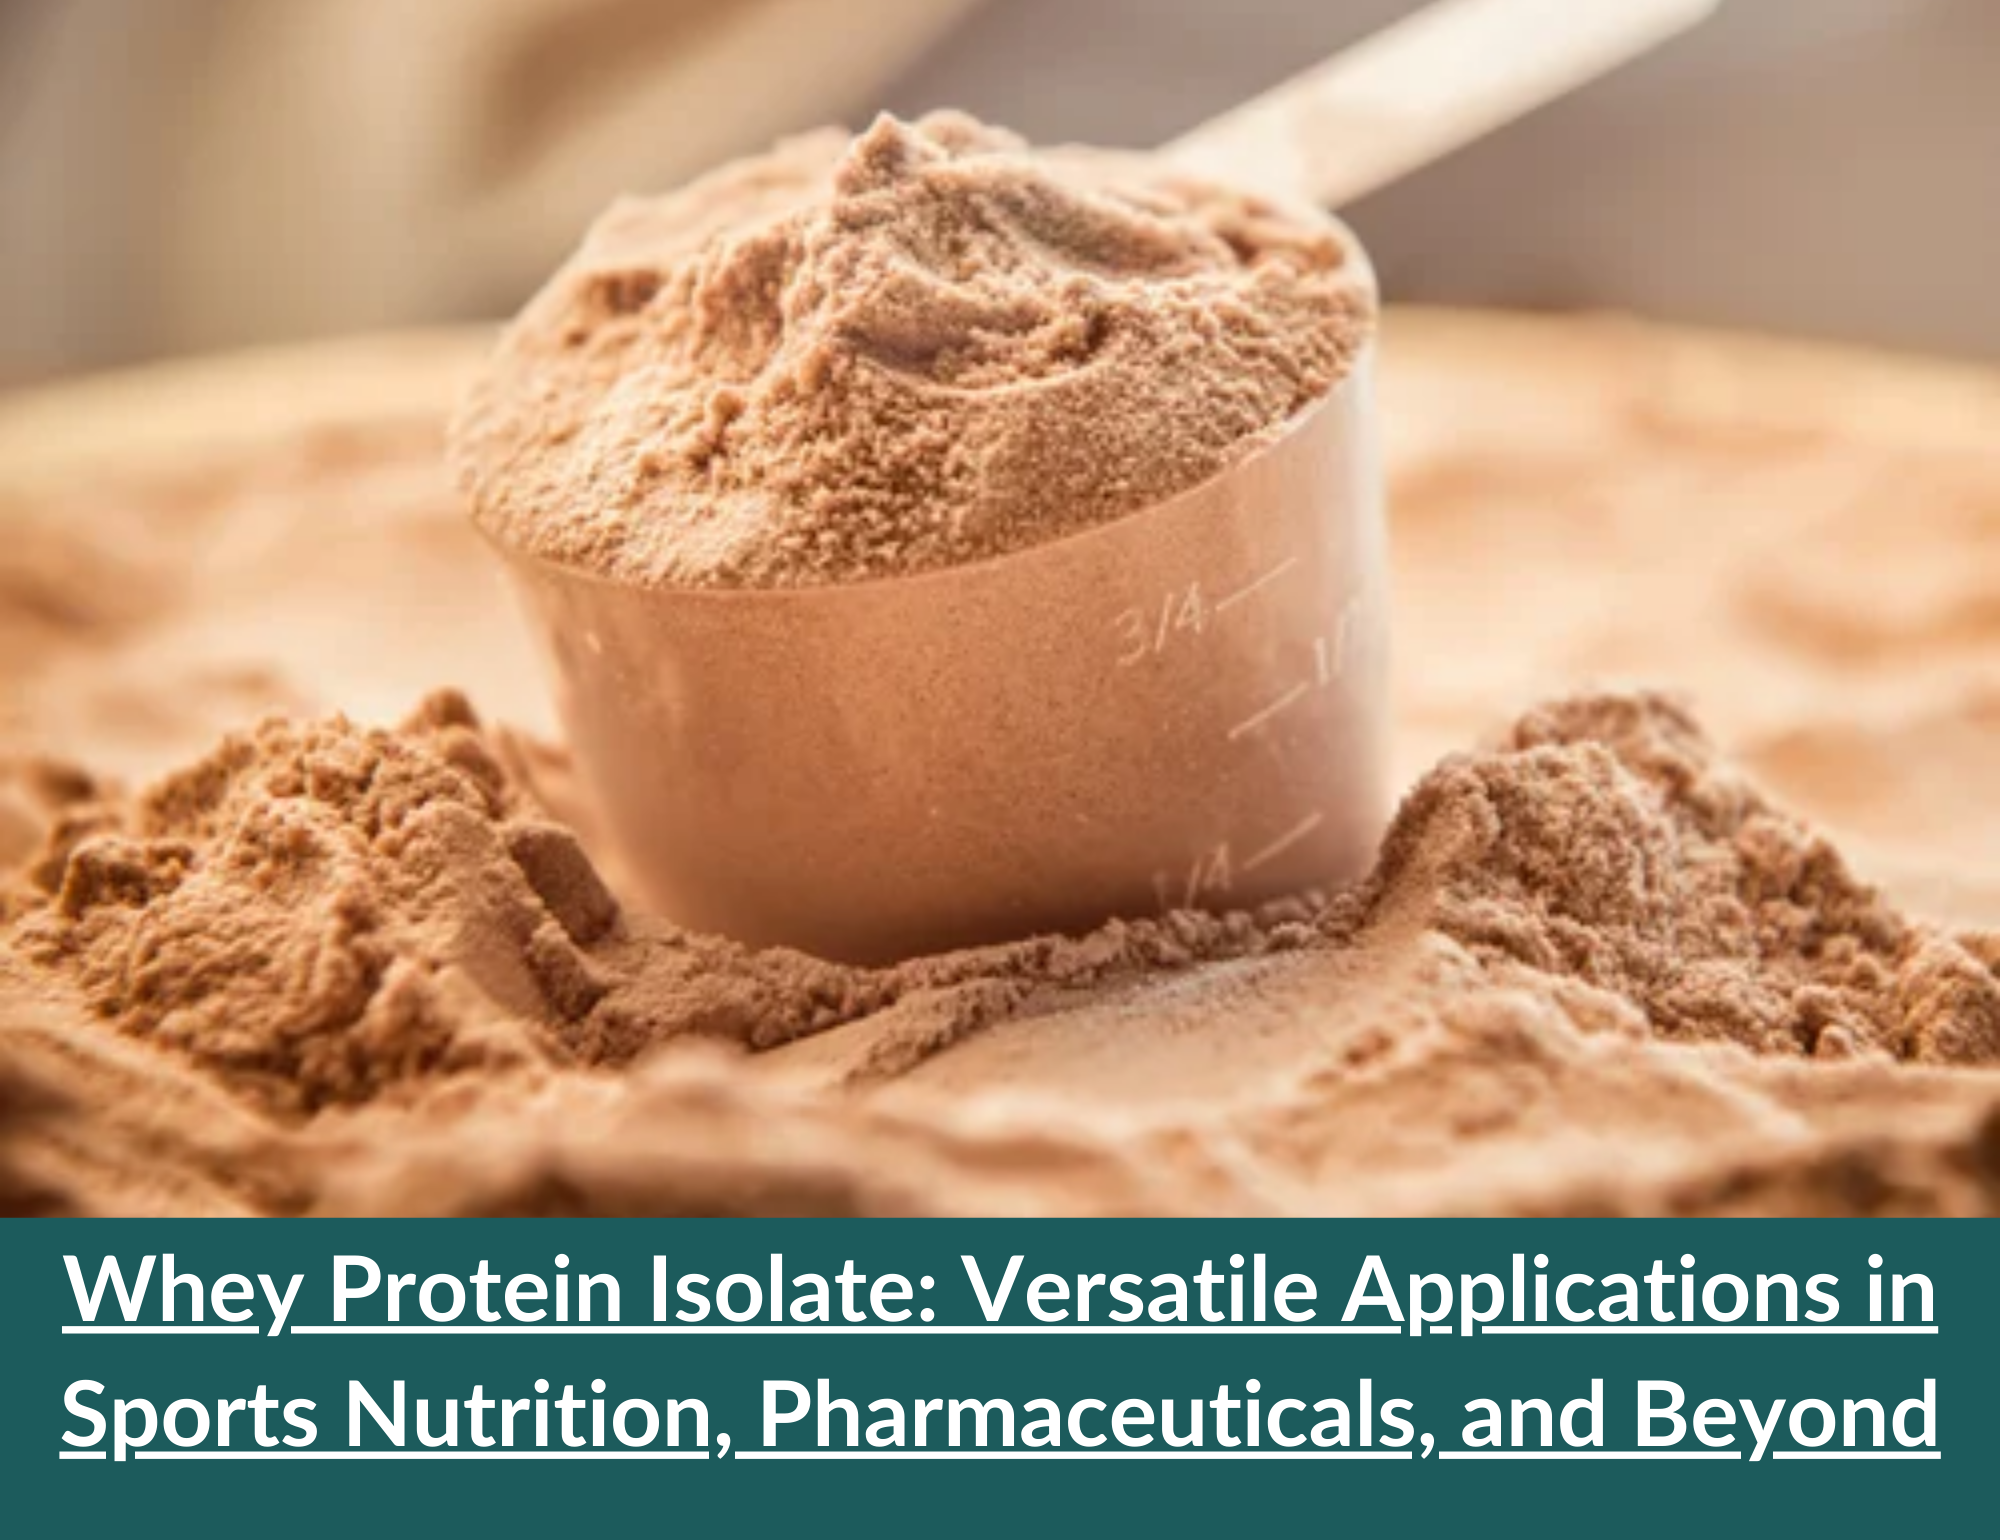 Whey Protein Isolate: Versatile Applications in Sports Nutrition, Pharmaceuticals, and Beyond